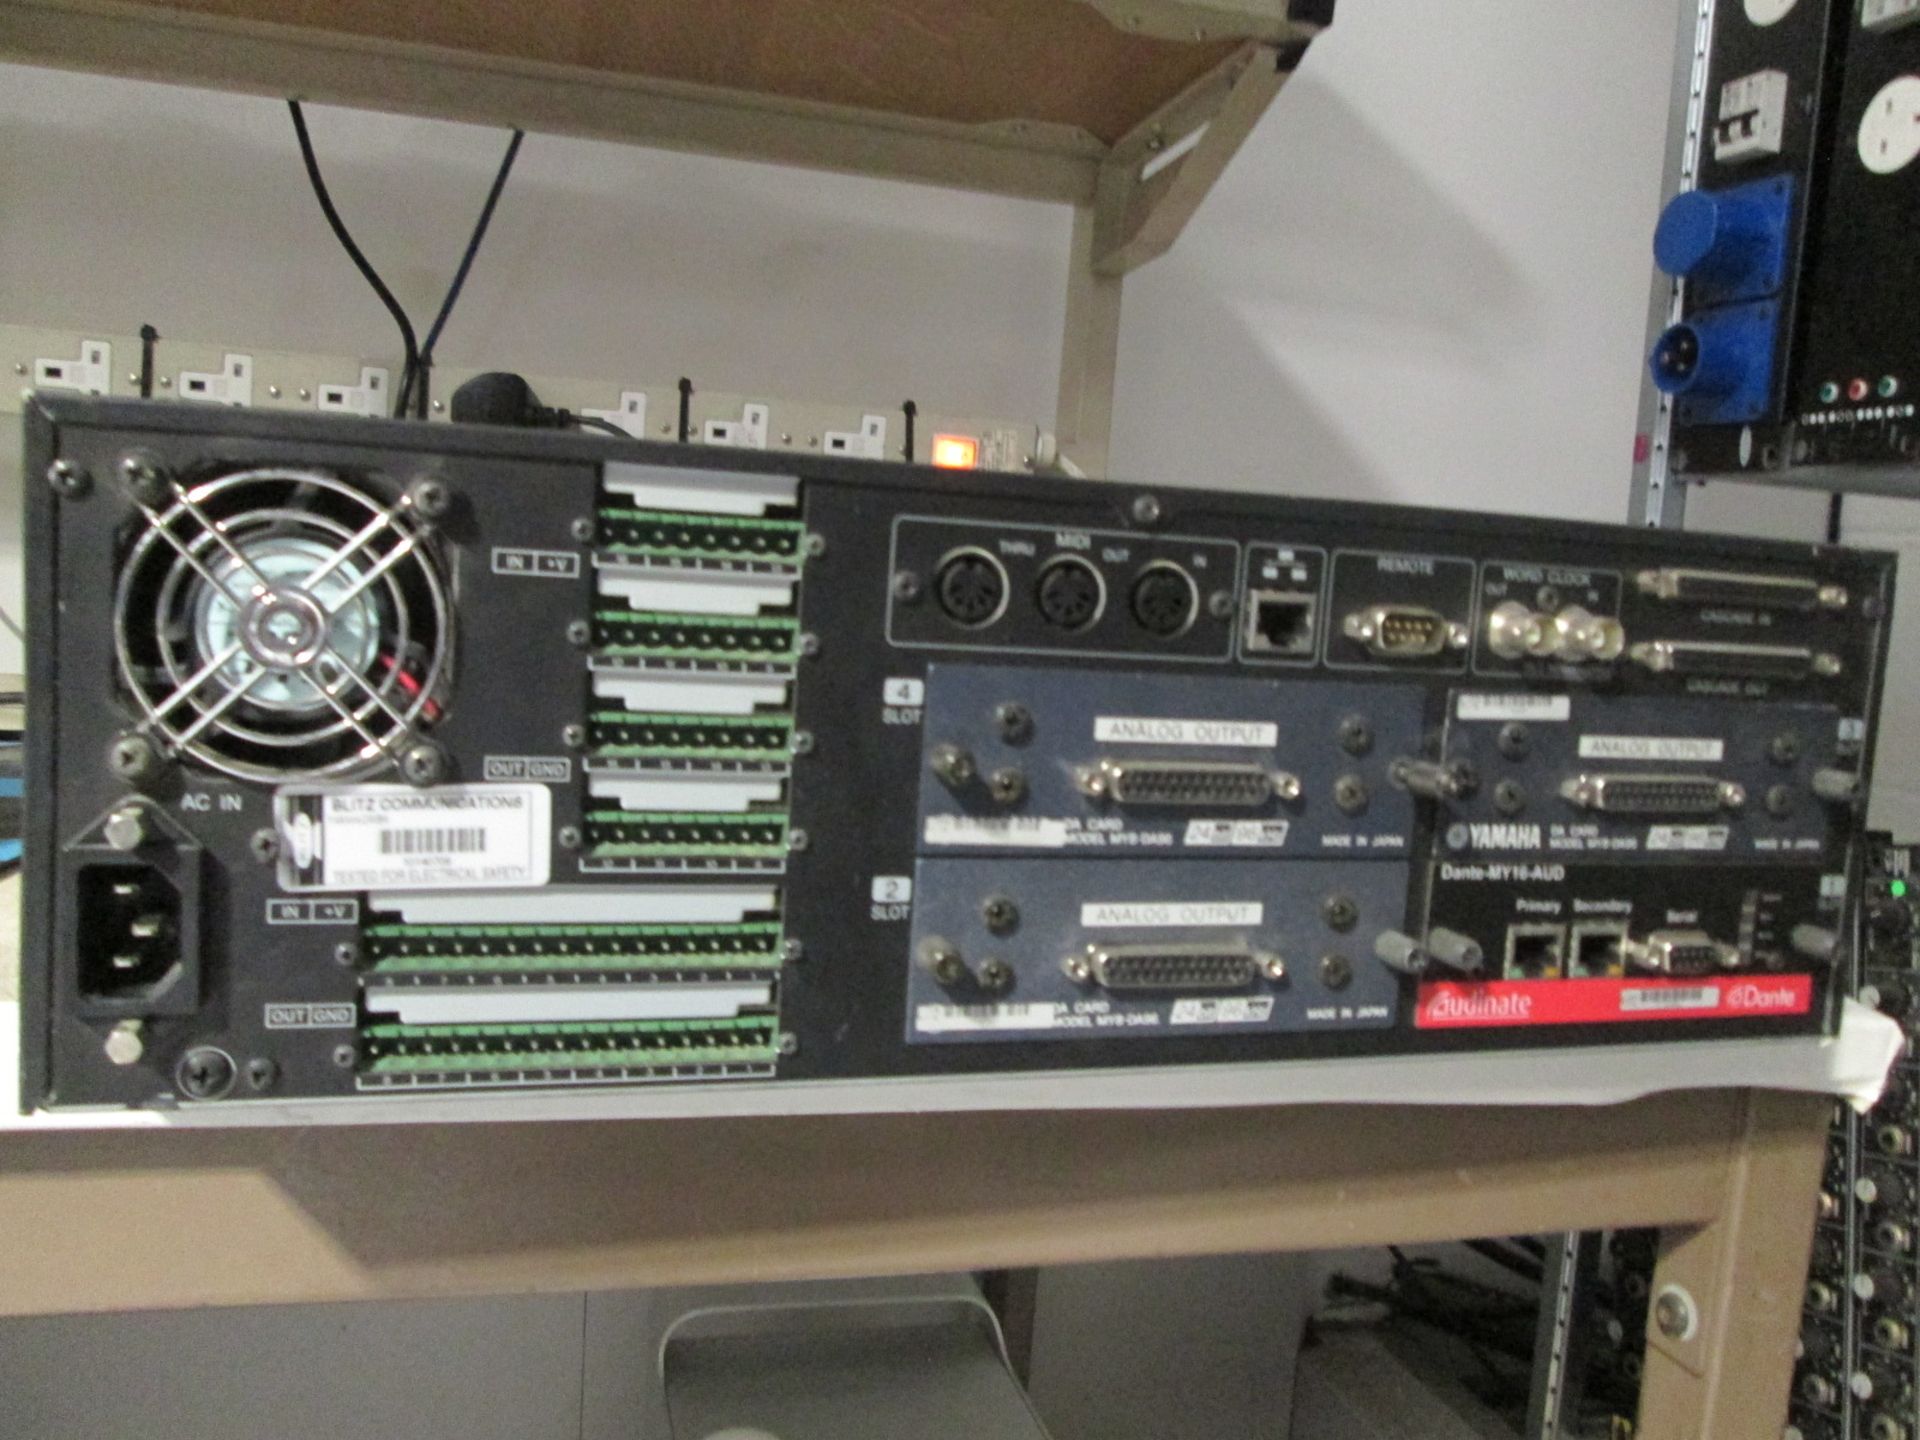 Yamaha DME64N Digital Mixing Engine with Spare Cards, Includes Yamaha DA 824 DA Conveter - Image 5 of 11